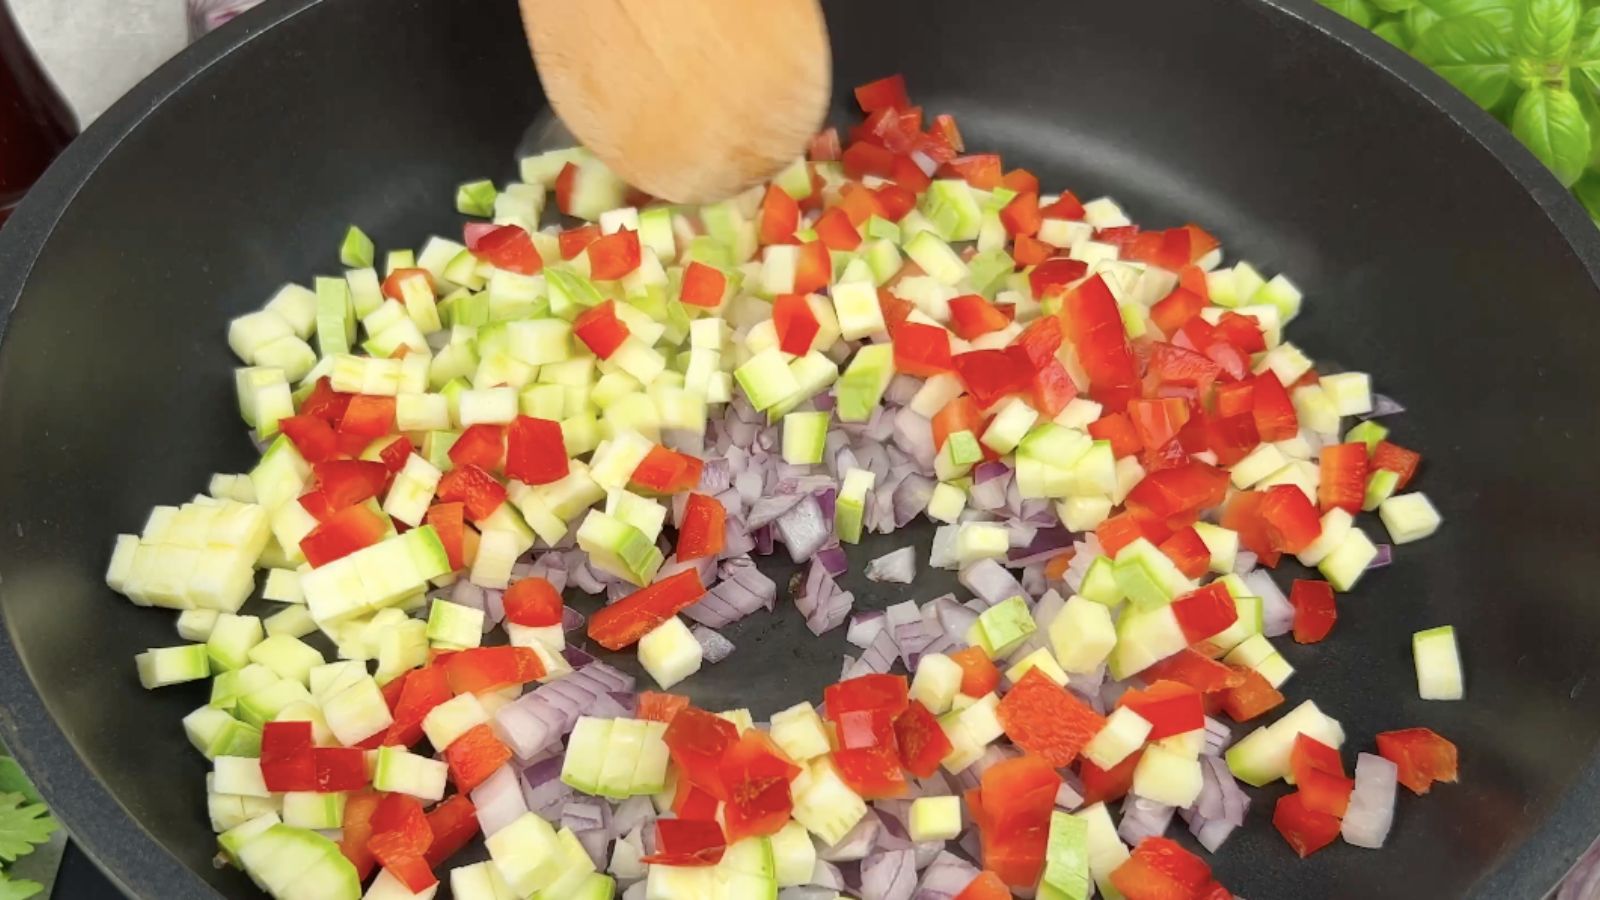 Red onion, red pepper, and zucchini in a skillet.
